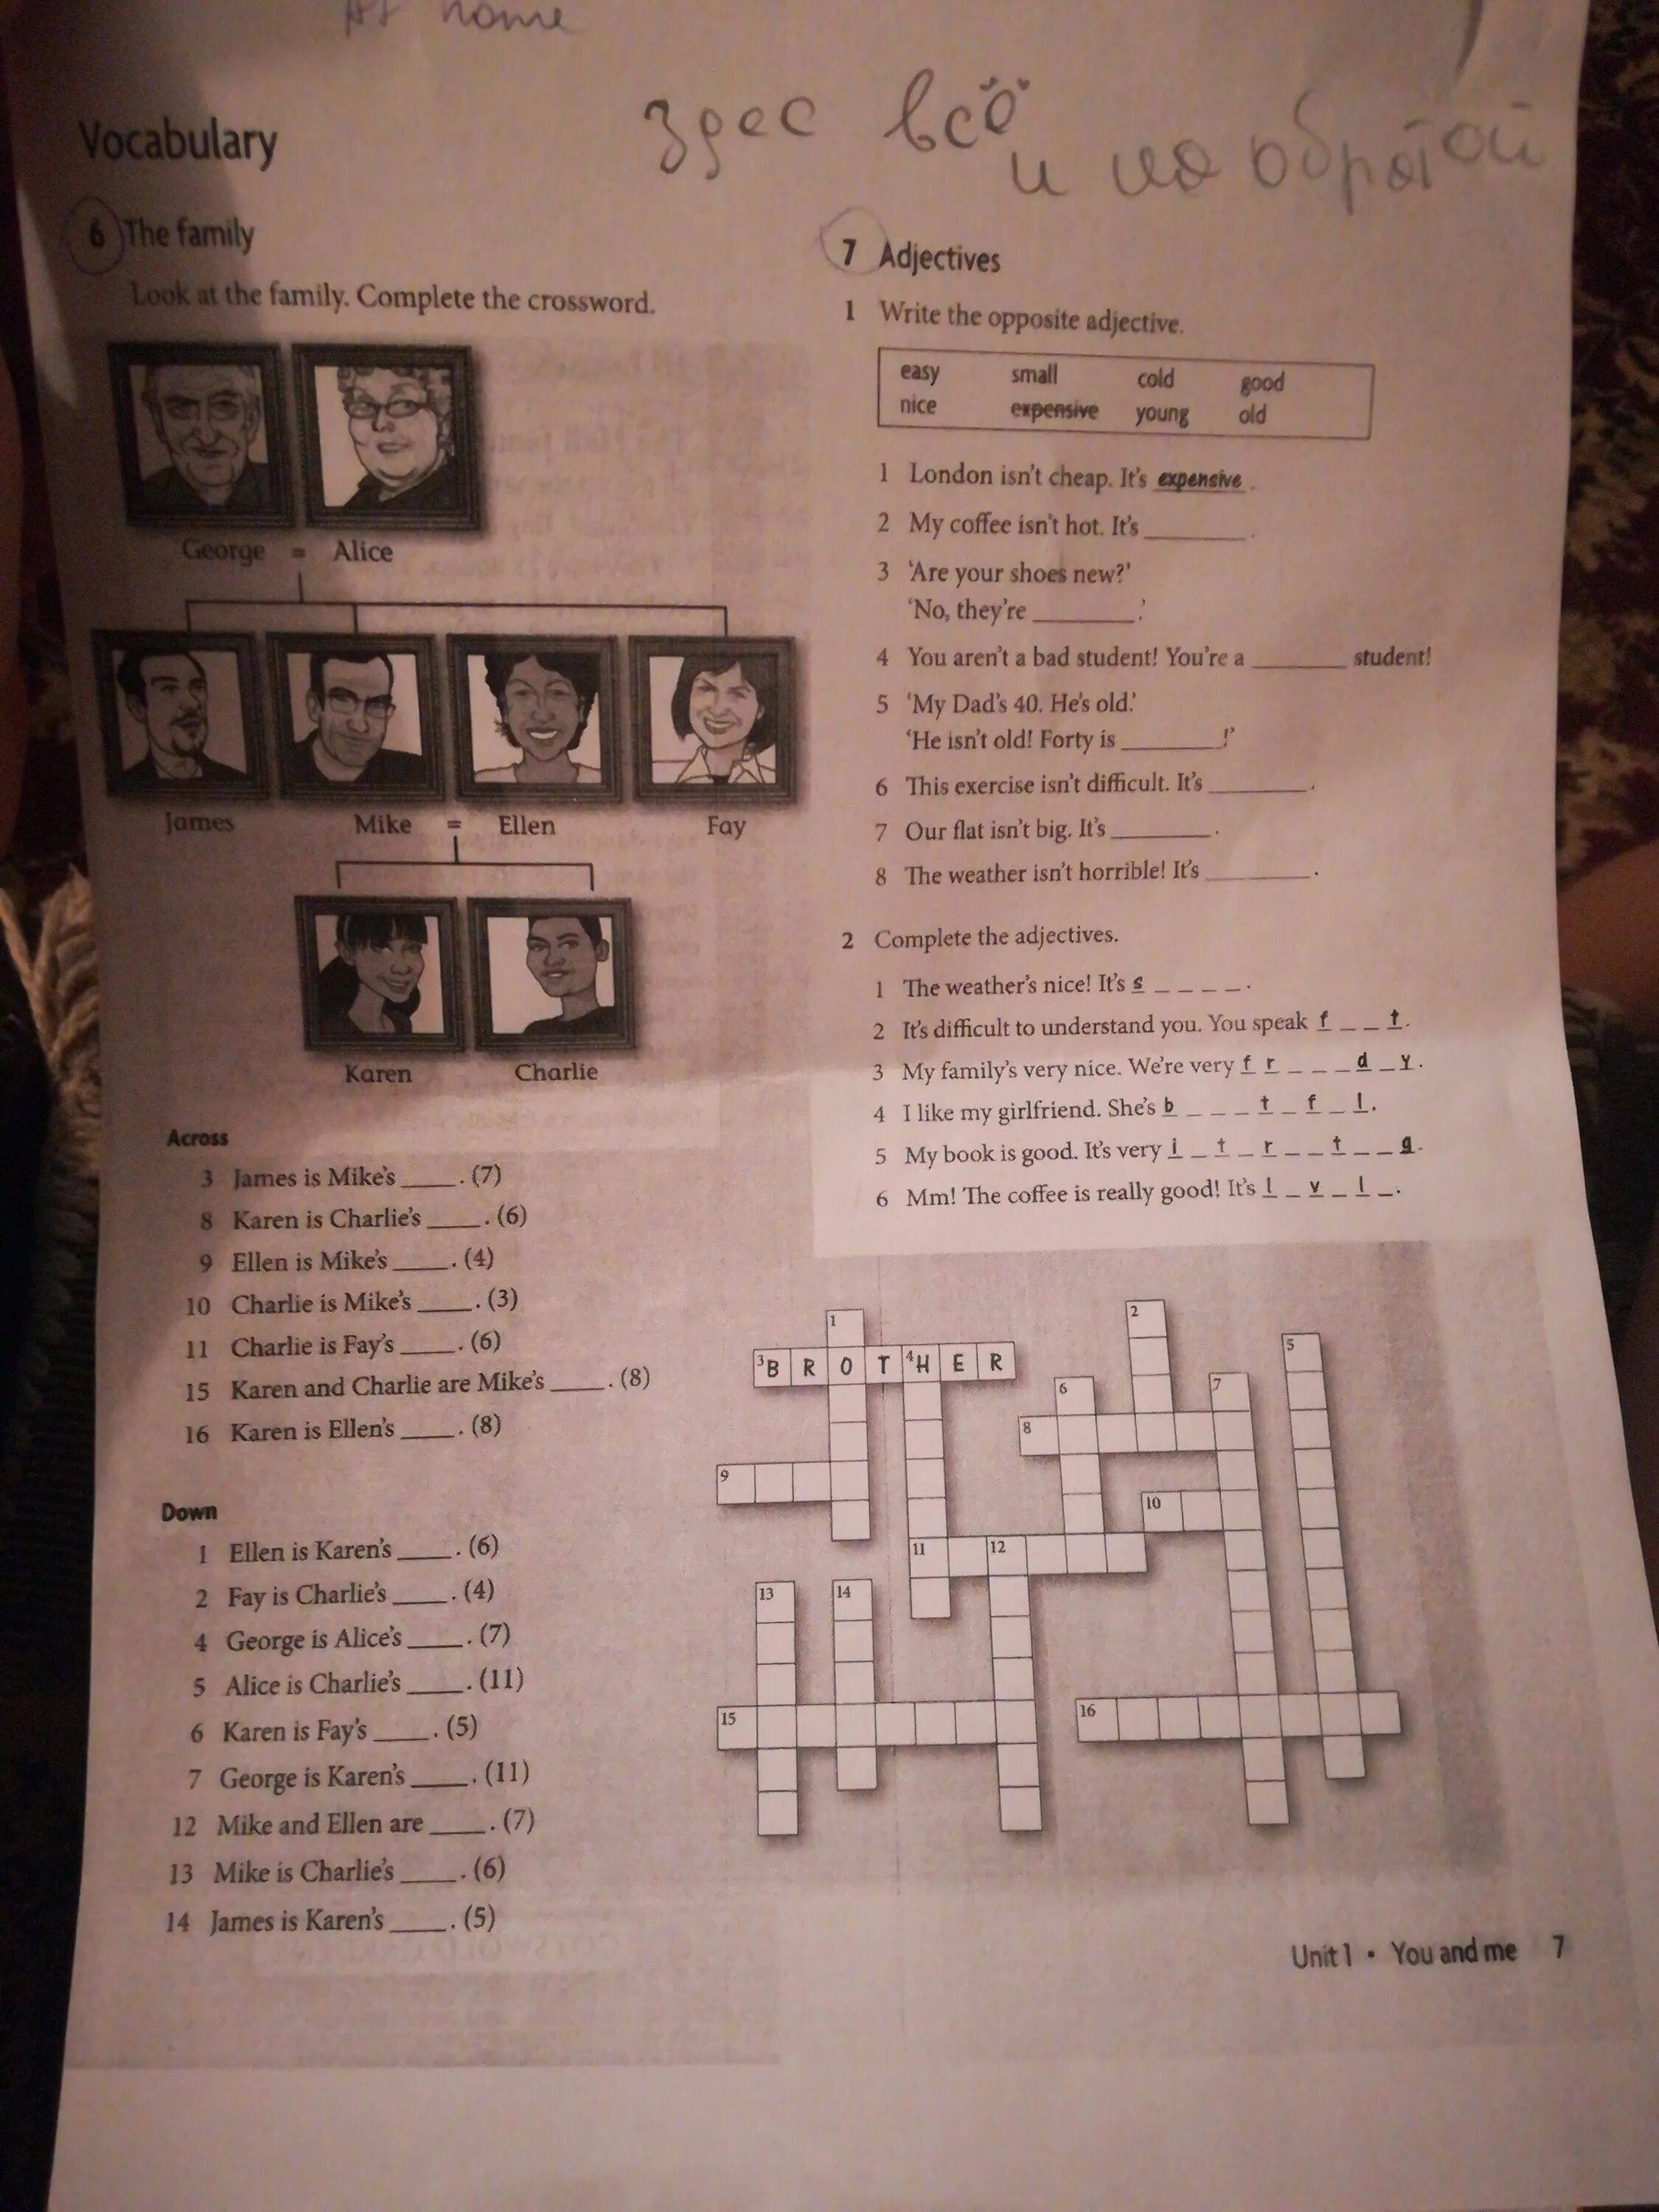 Look and complete the crossword ответы. Look at the Family complete the crossword ответы. 6. Look at the Family. Complete the crossword ответы. Look at the Family Tree complete the crossword. 4 complete the crossword